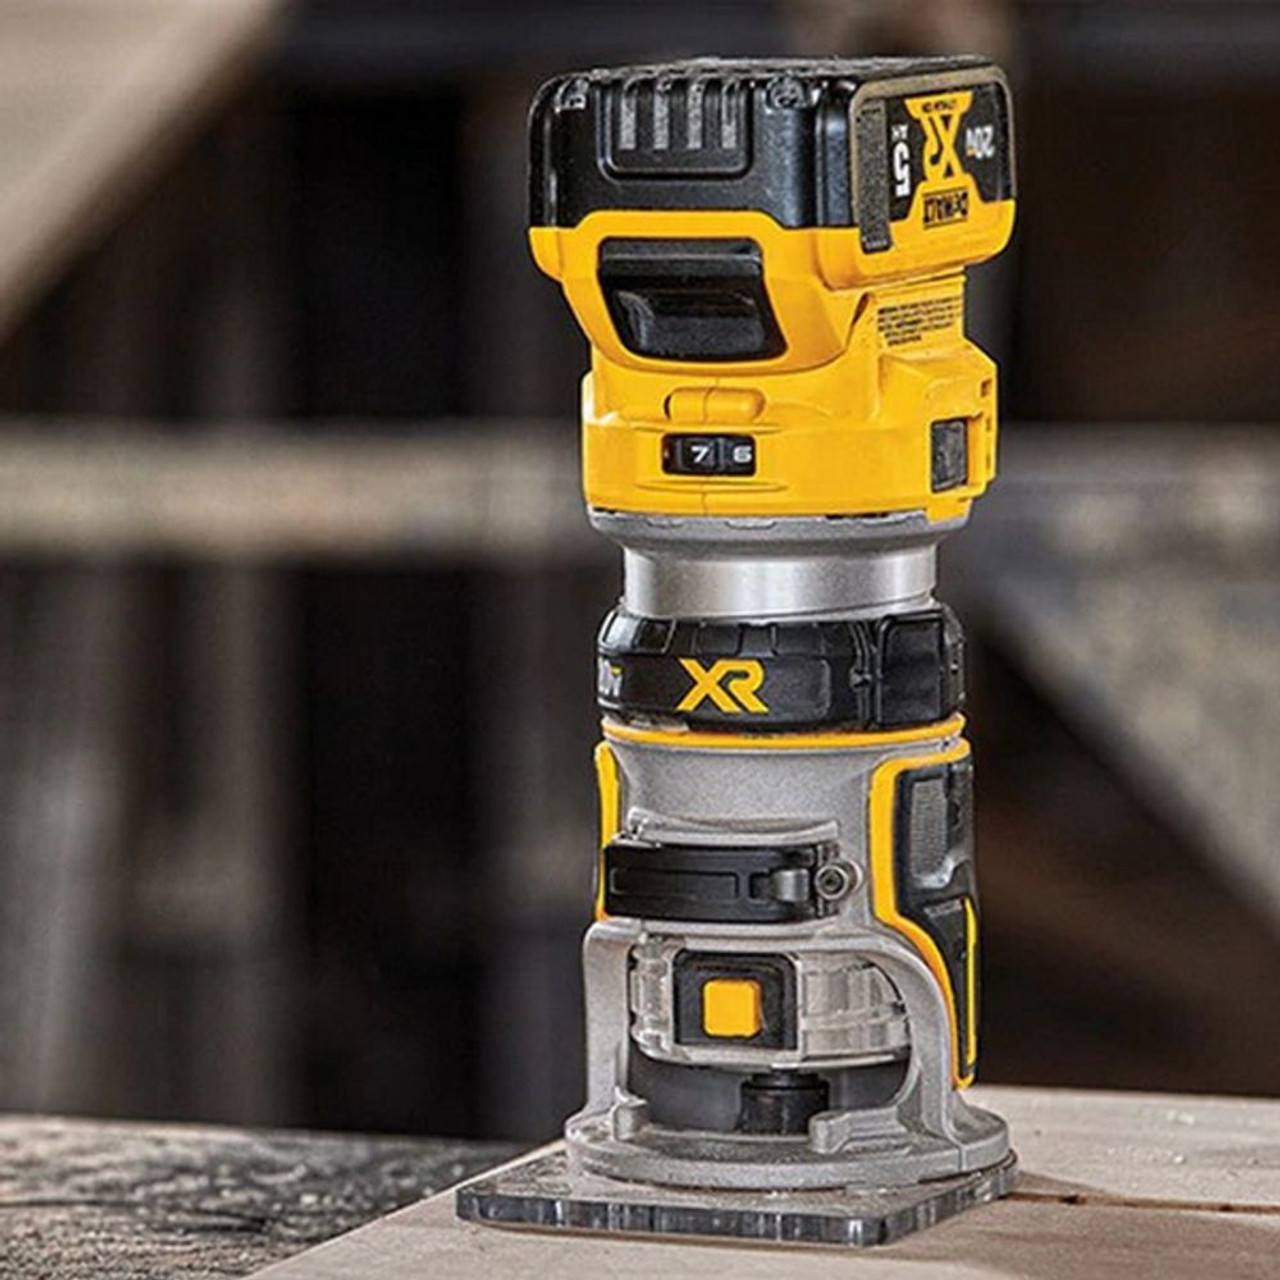 DEWALT DCW604P2-QW 18v XR Cordless Brushless 1/4'' Router Kit with battery  and charger